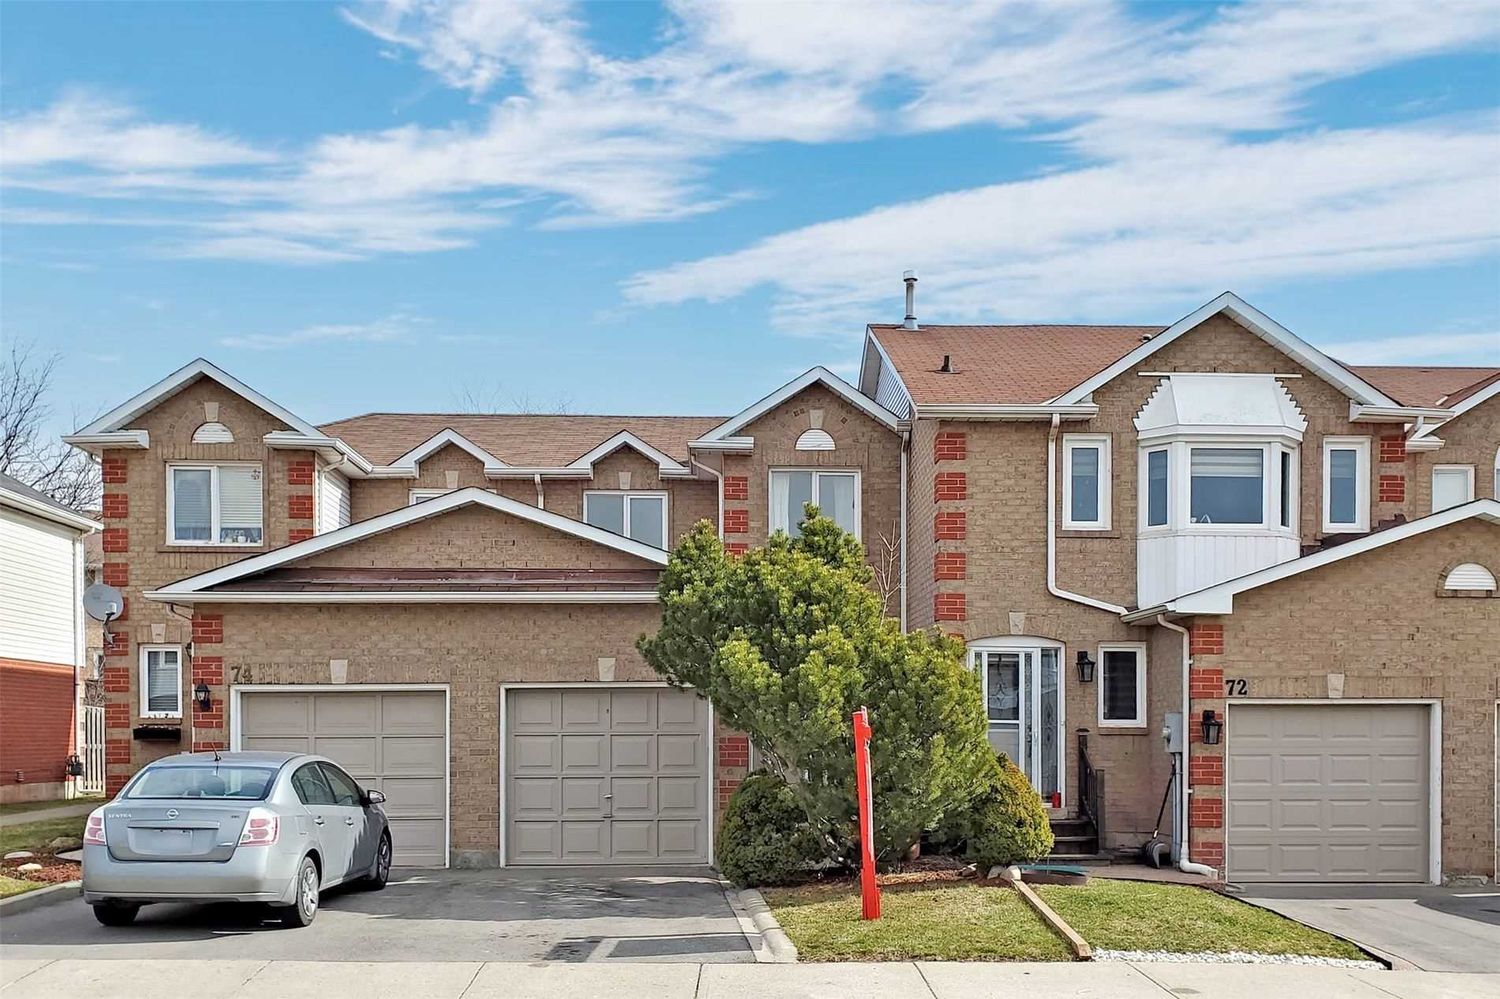 2350 Grand Ravine Drive. 2350 Grand Ravine Drive Townhomes is located in  Oakville, Toronto - image #1 of 2